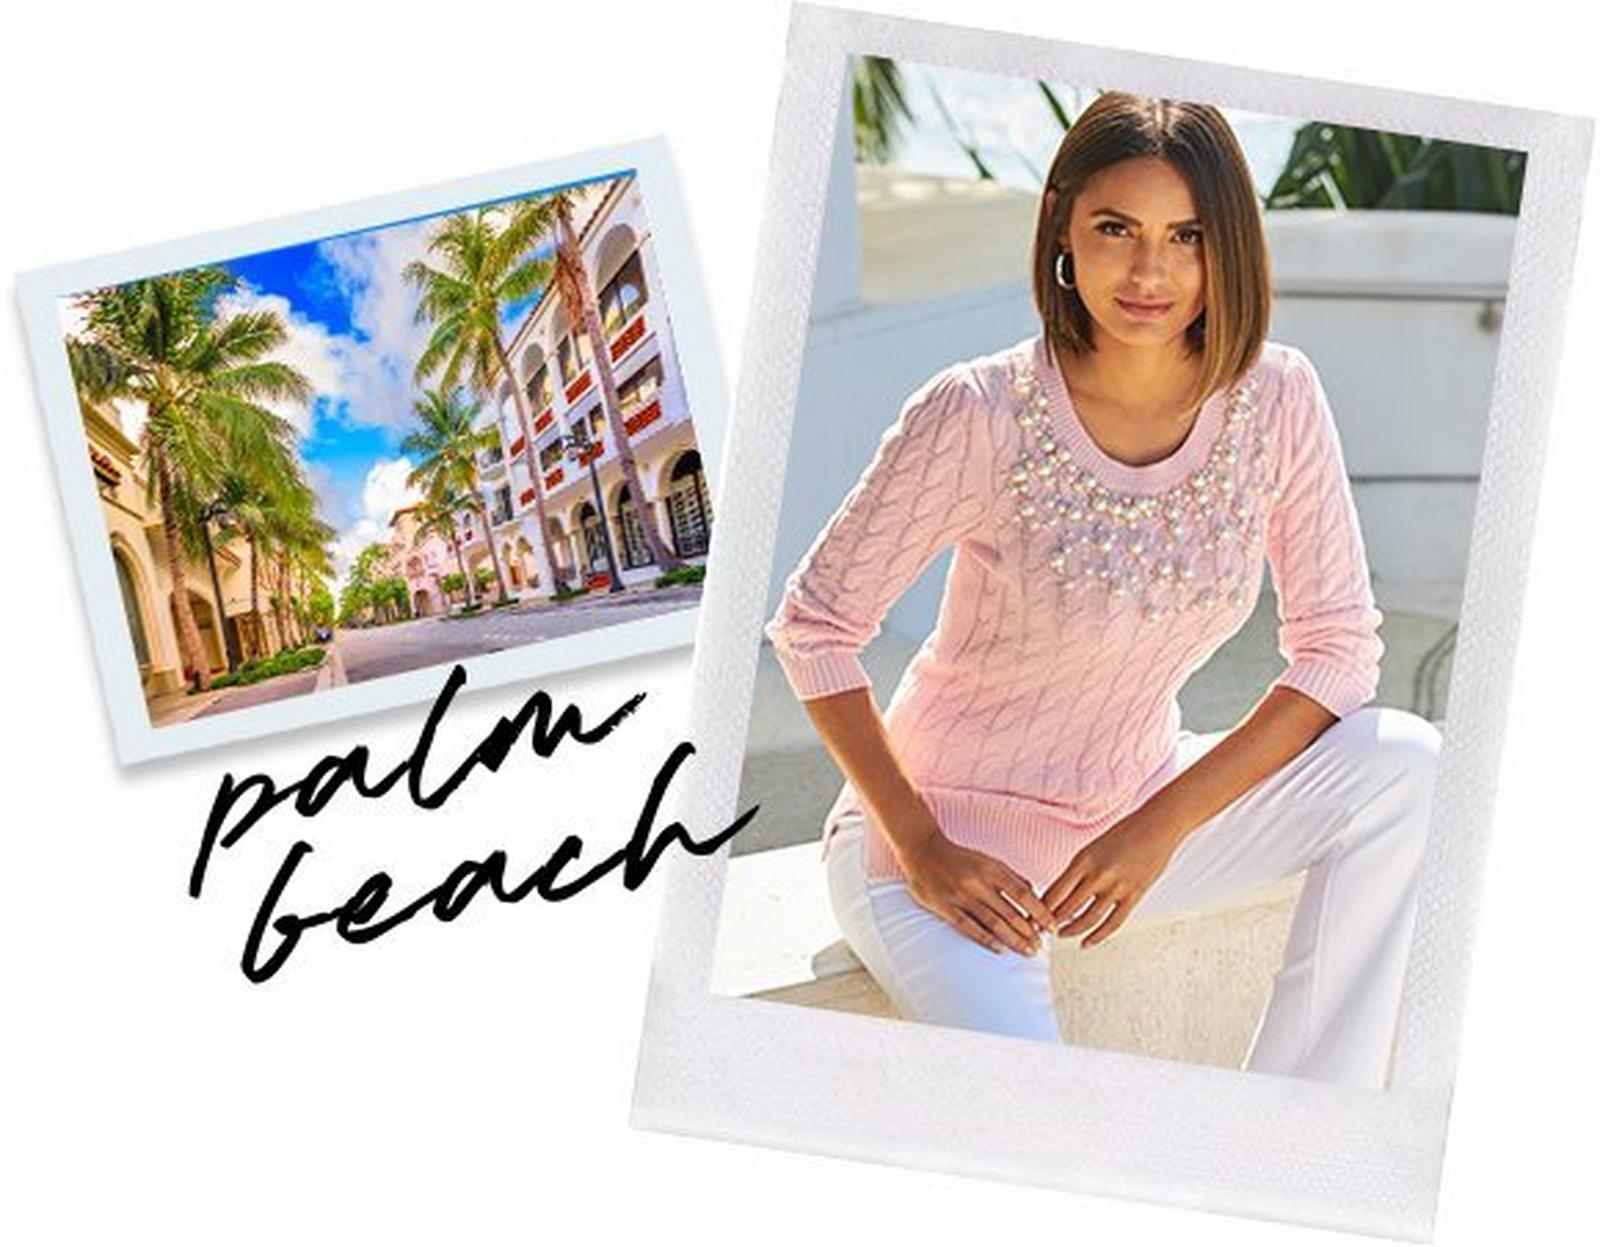 left panel shows a picture of palm beach. right model wearing a pink pearl embellished cable knit sweater and white wide-leg jeans.